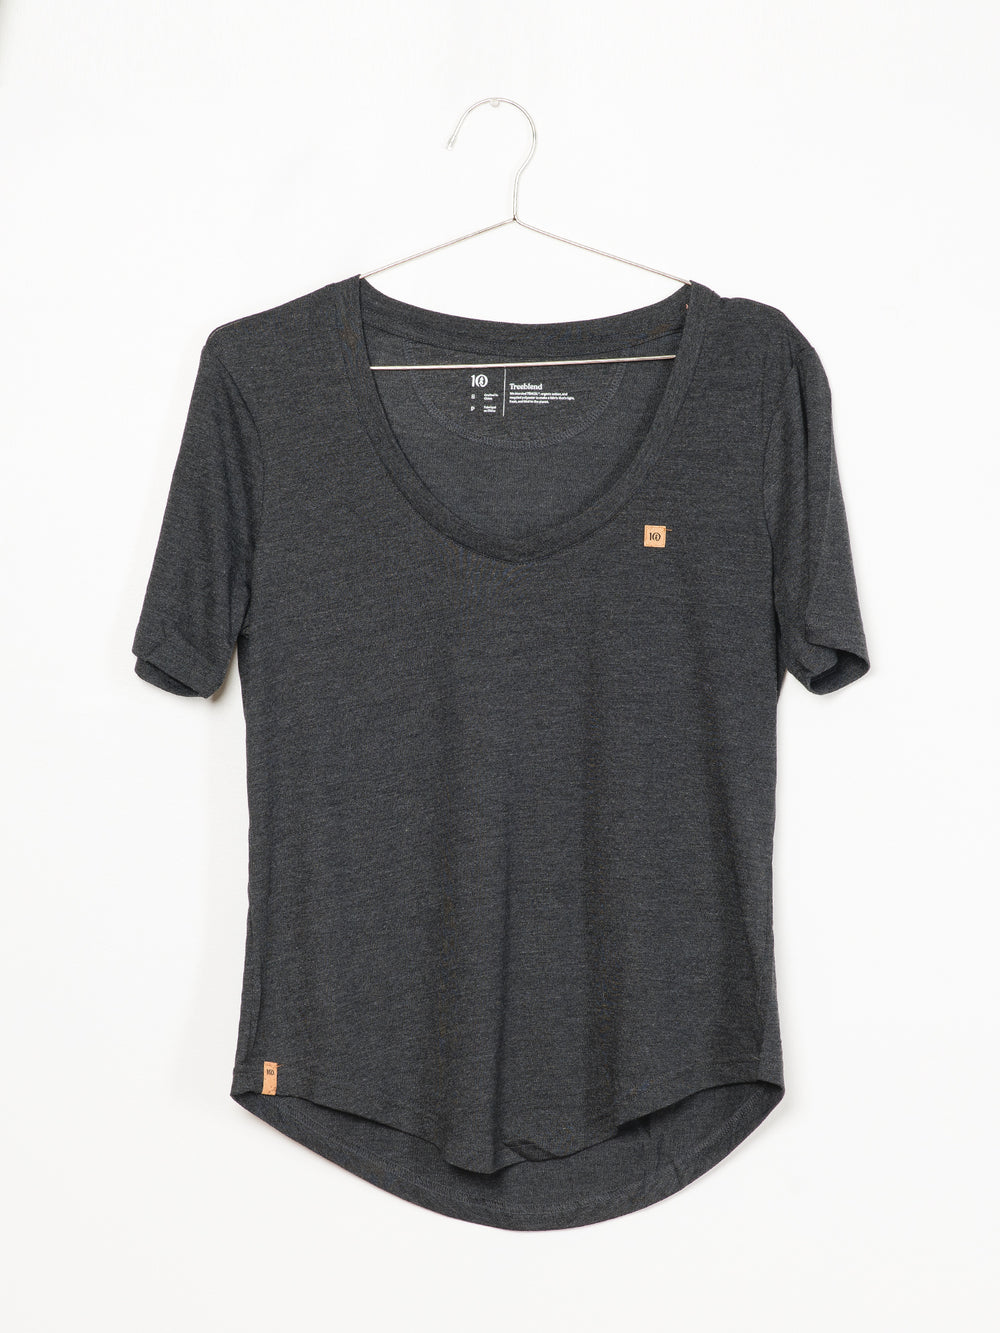 TENTREE V-NECK CORK PATCH T-SHIRT - CLEARANCE